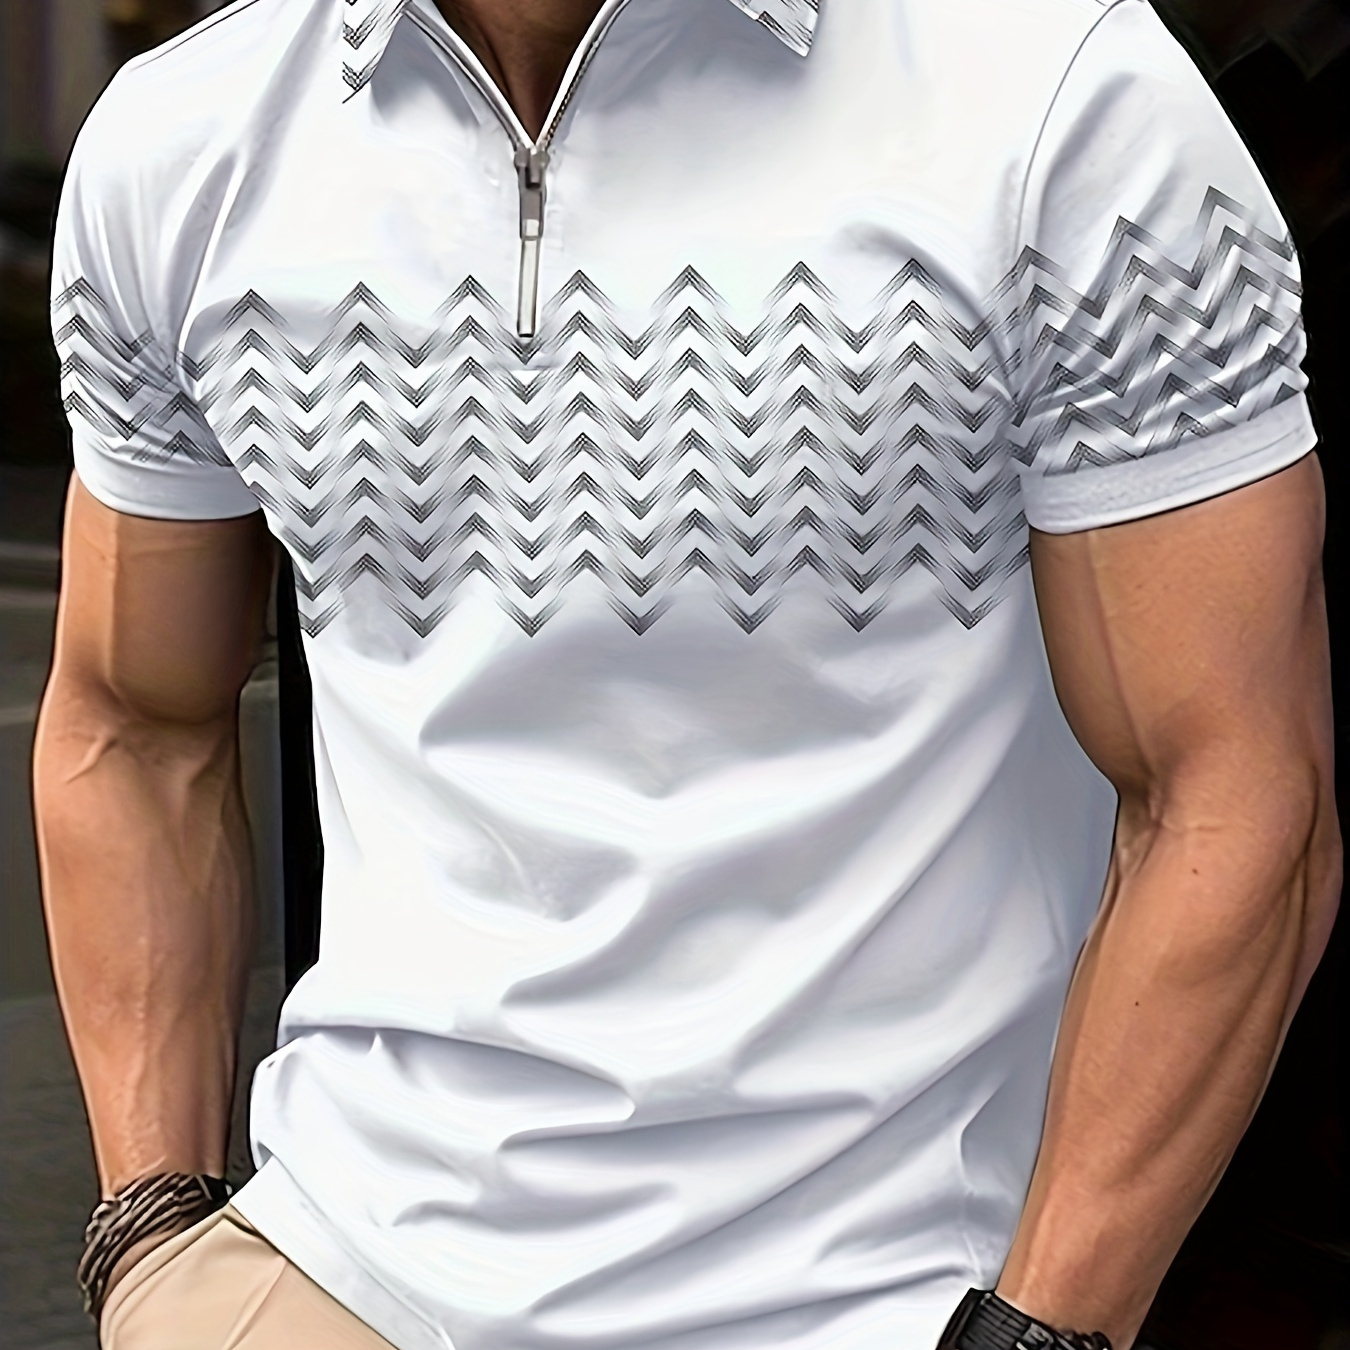 

Men's Trendy Geometric Casual Short Sleeves Zip Up Graphic Shirts, Lapel Collar Tops Pullovers, Men's Clothing For Summer